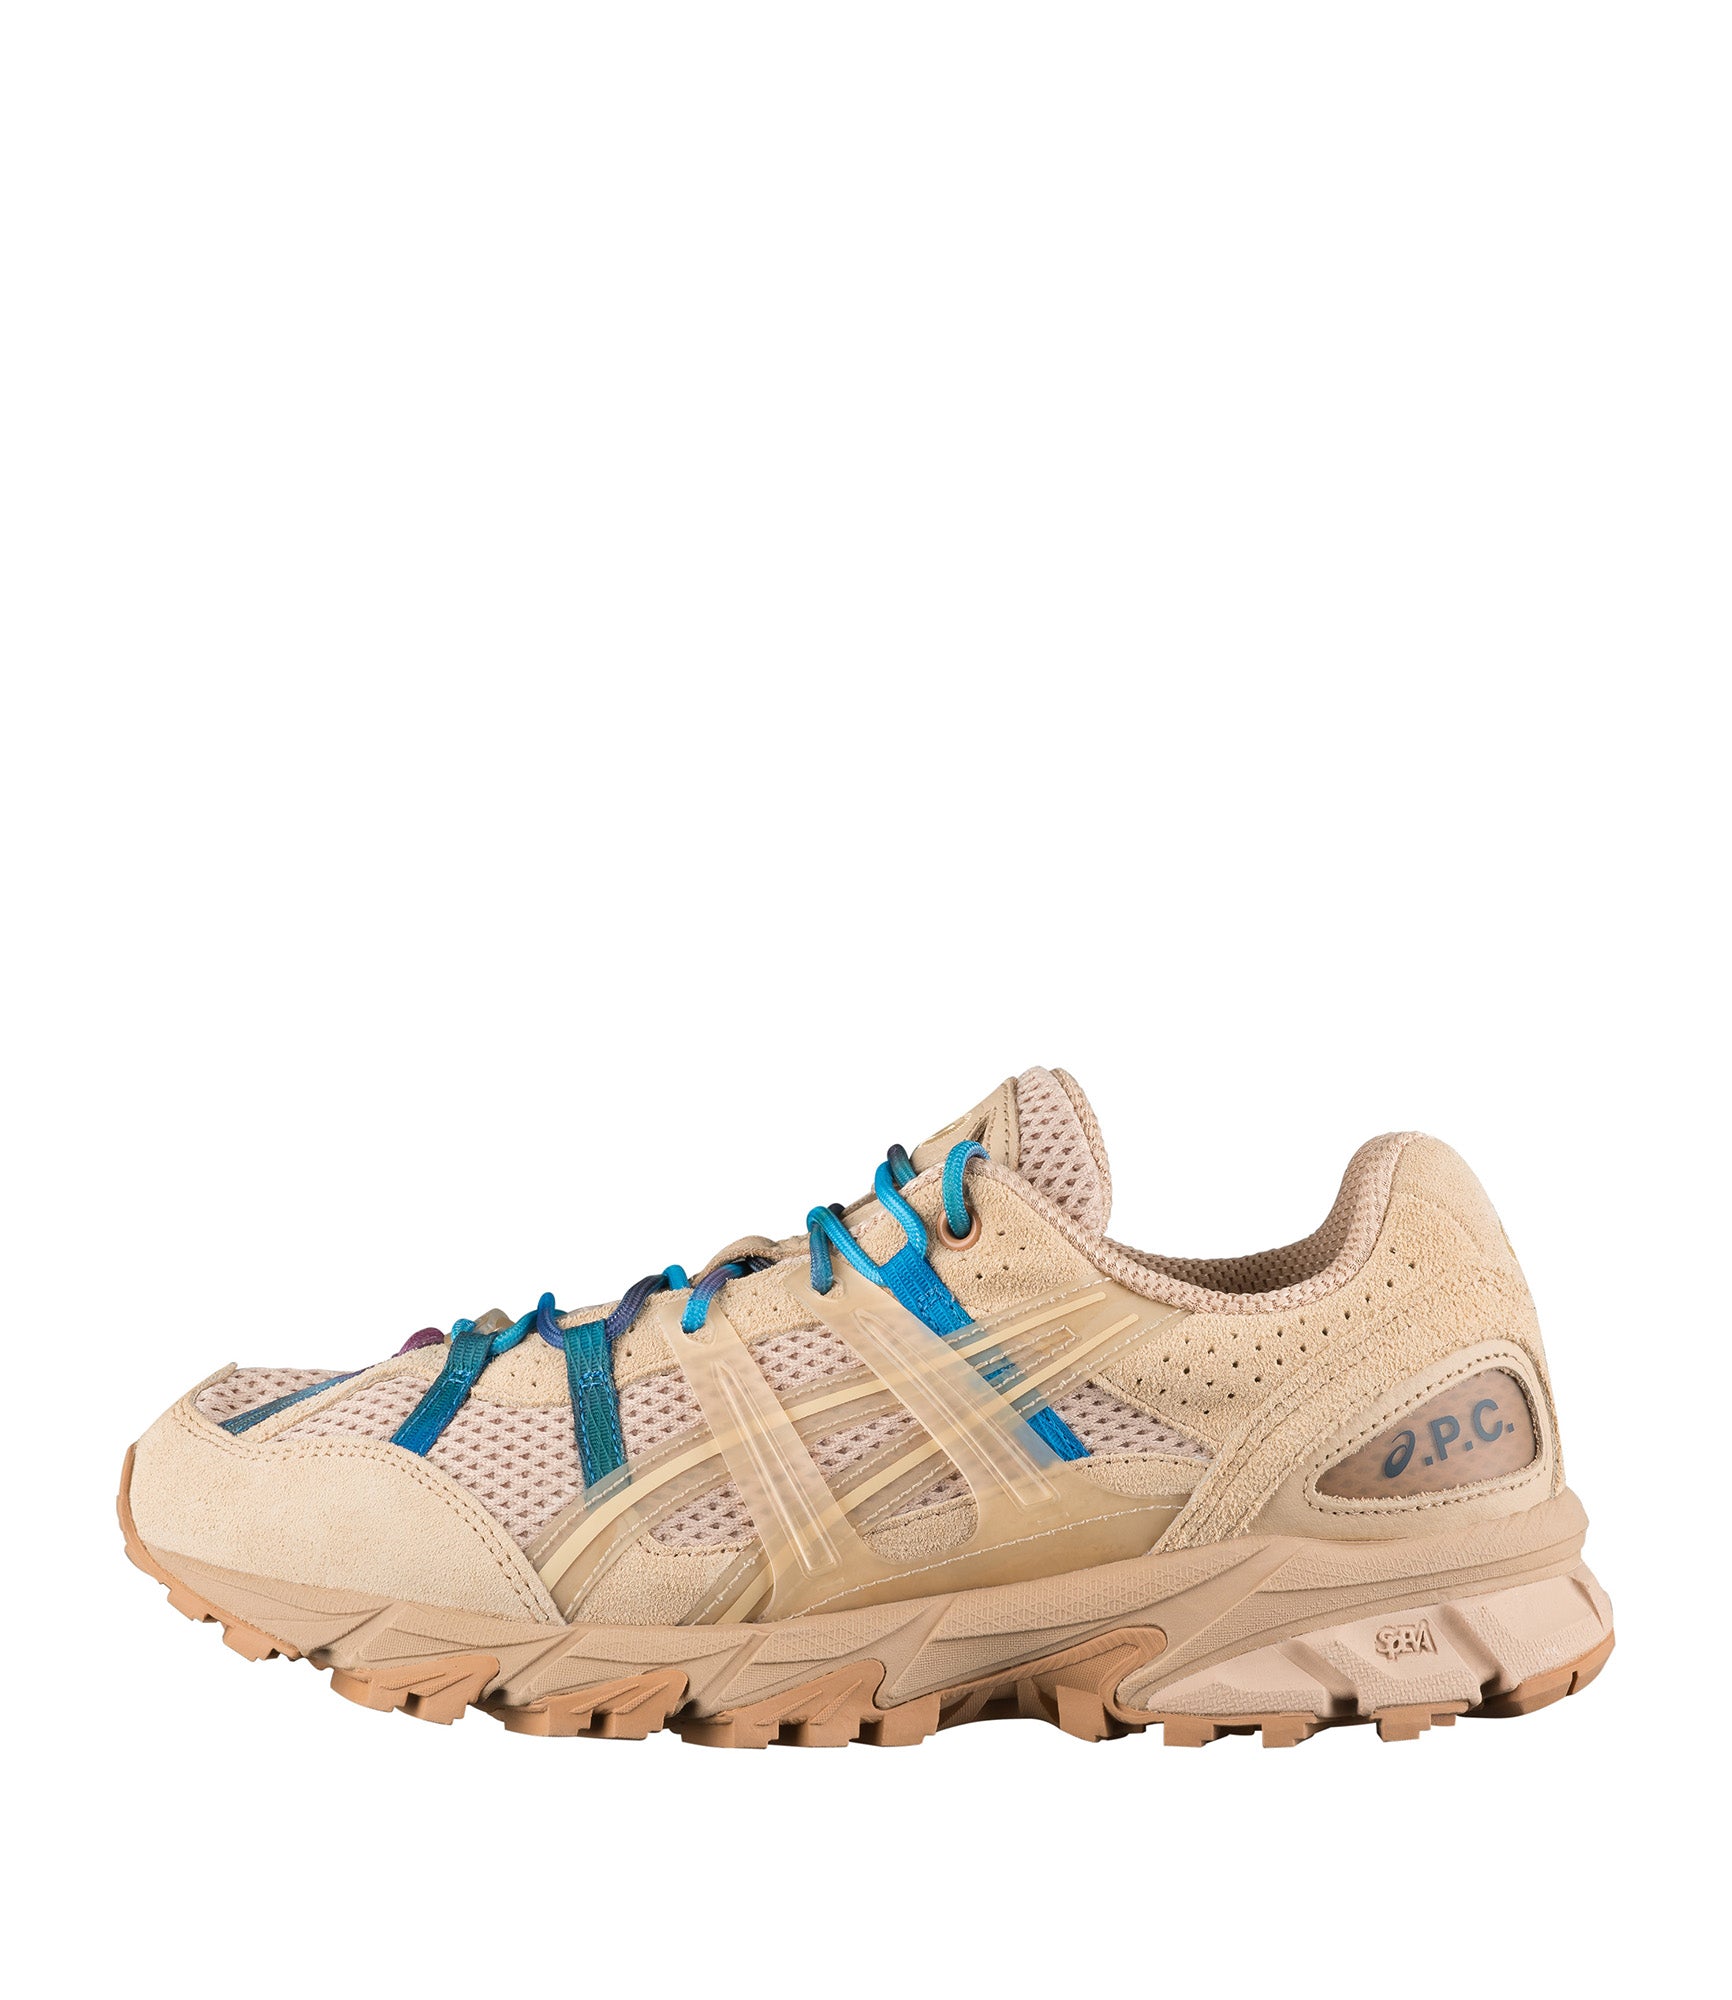 ASICS GEL-SONOMA™ 15-50 x A.P.C. - Mesh and suede split | A.P.C.